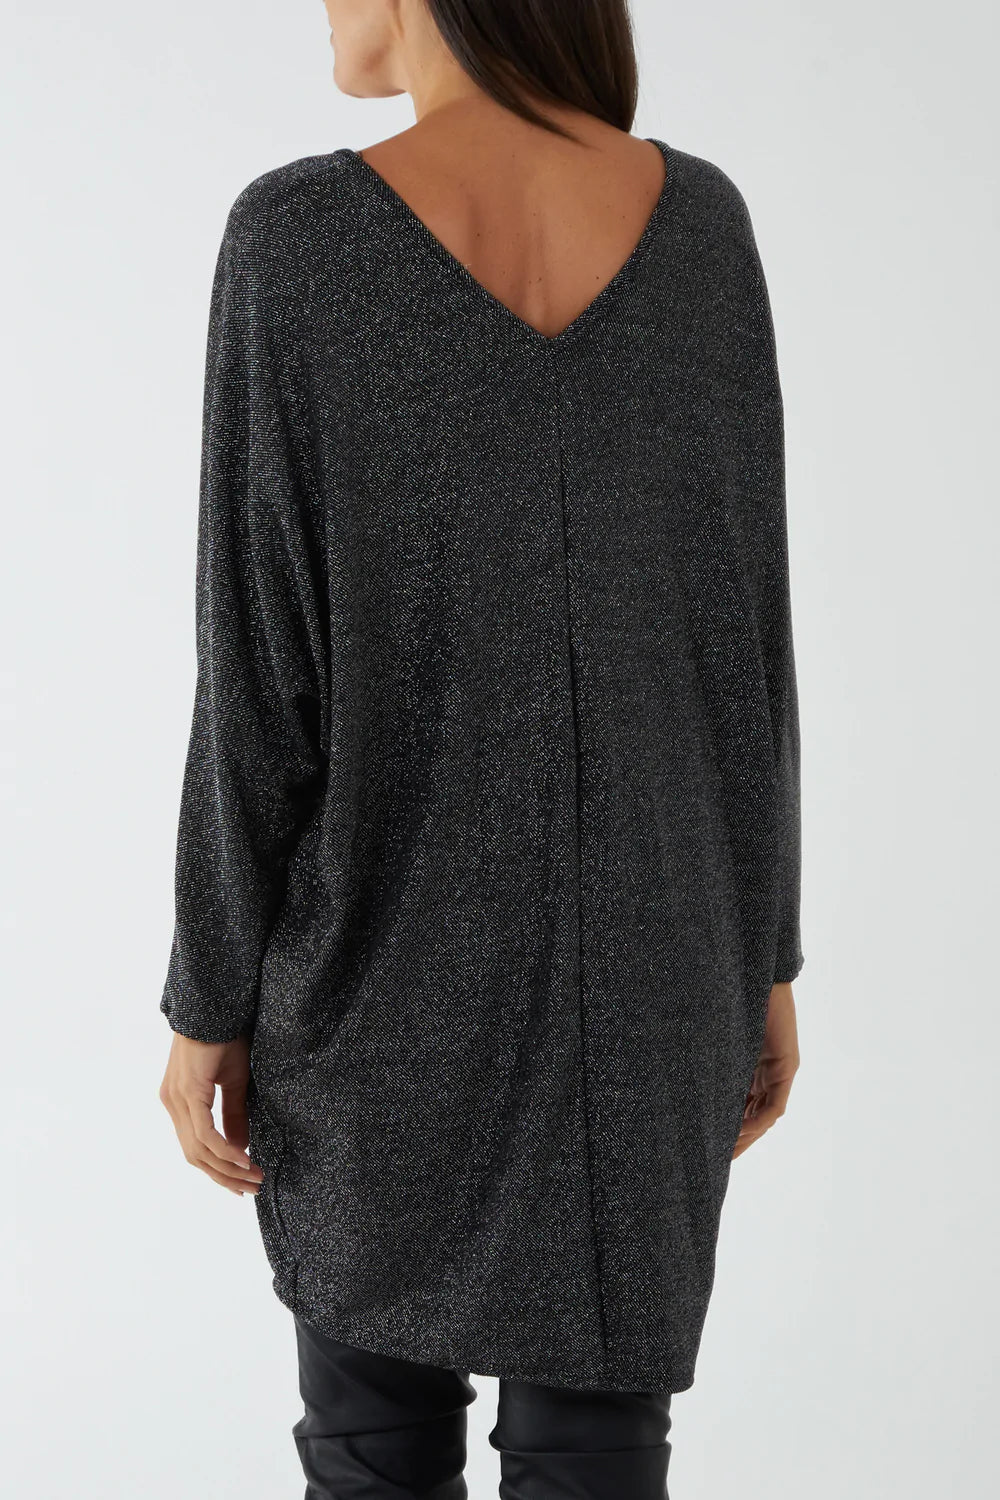 Lurex glitter black and silver tunic dress with long sleeves and v neck